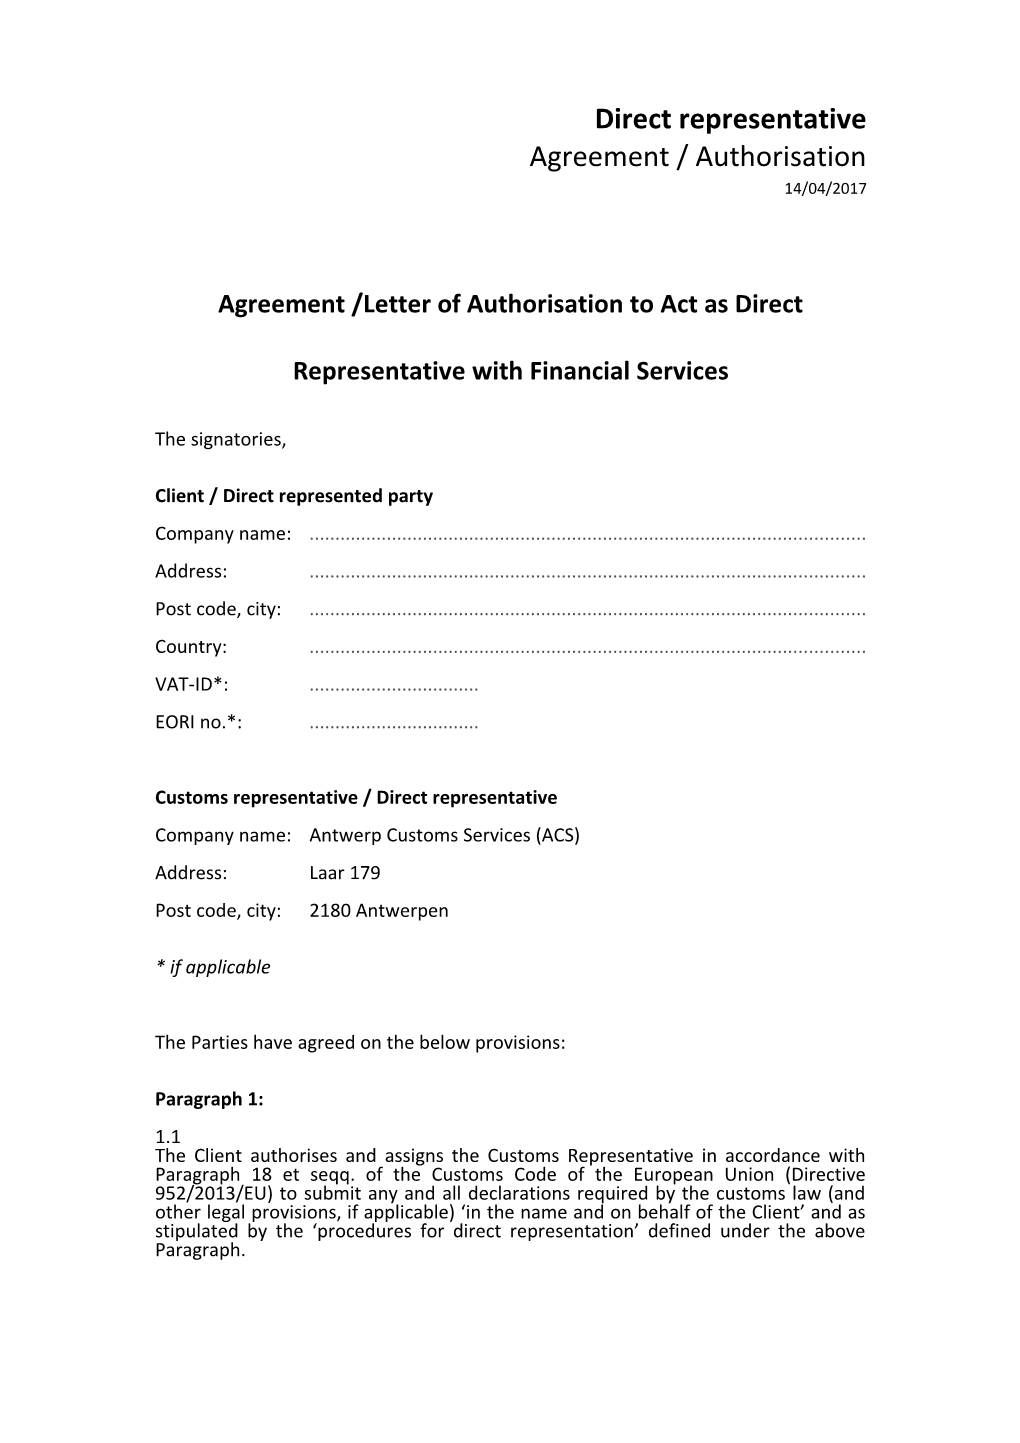 Agreement /Letter of Authorisation to Act As Direct Representative with Financial Services